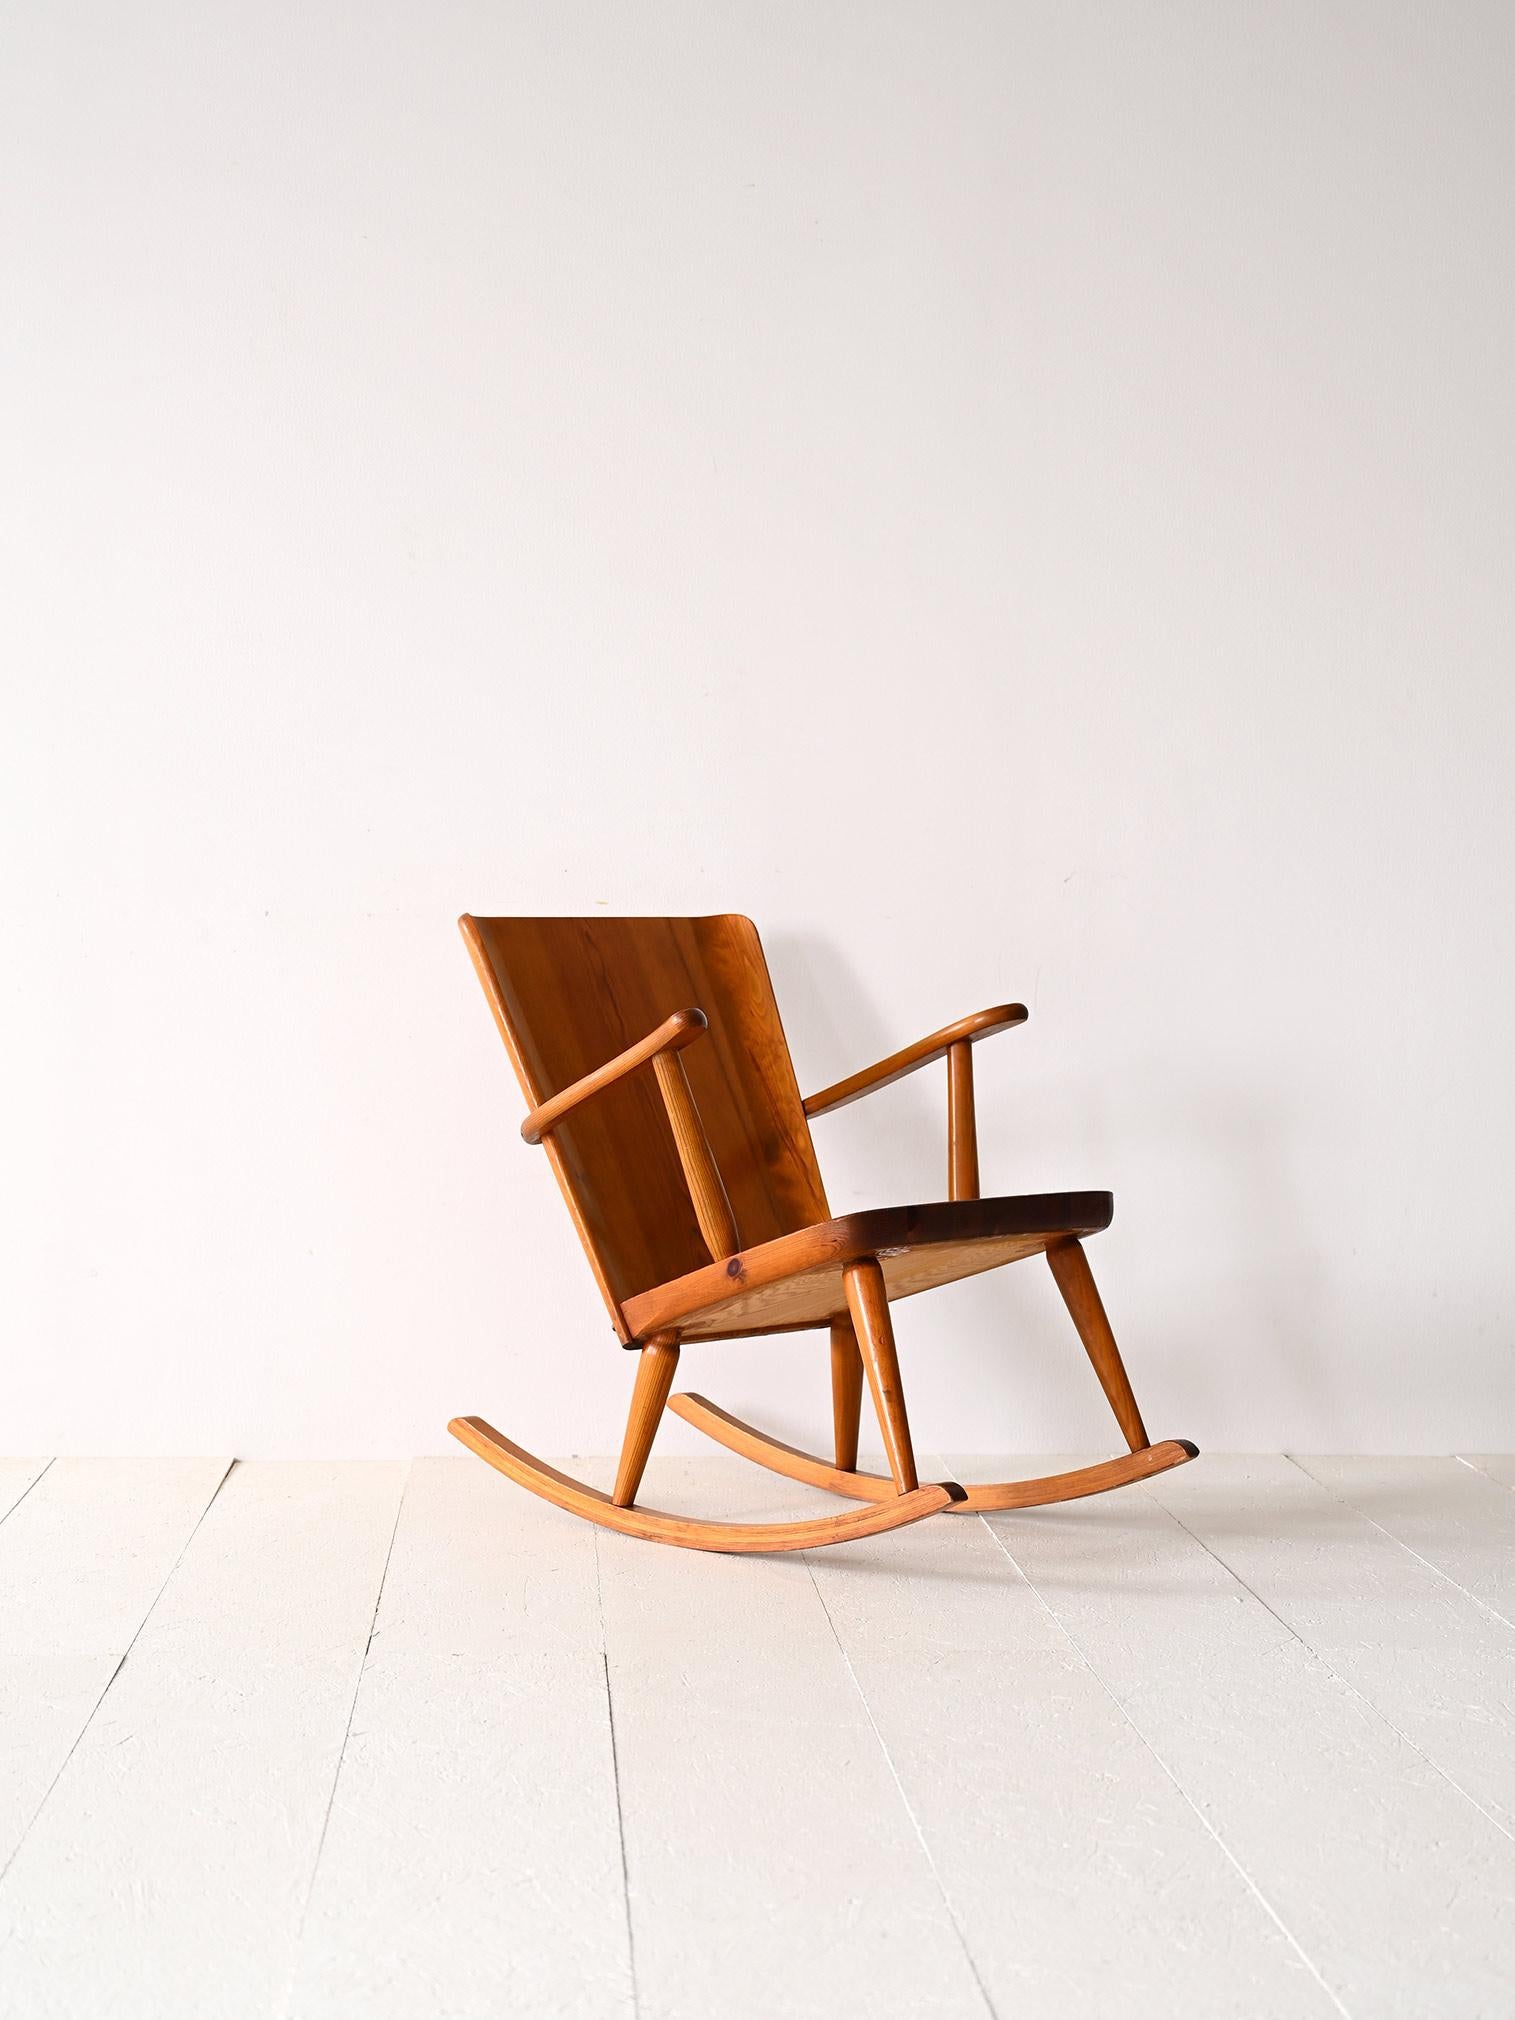 Pine wood rocking chair with armrests.

A Swedish design piece that is part of the Svensk Fur range, a type of pine furniture designed specifically for Swedish summer homes in the late 1930s and 1940s.
An original, solid wood chair model